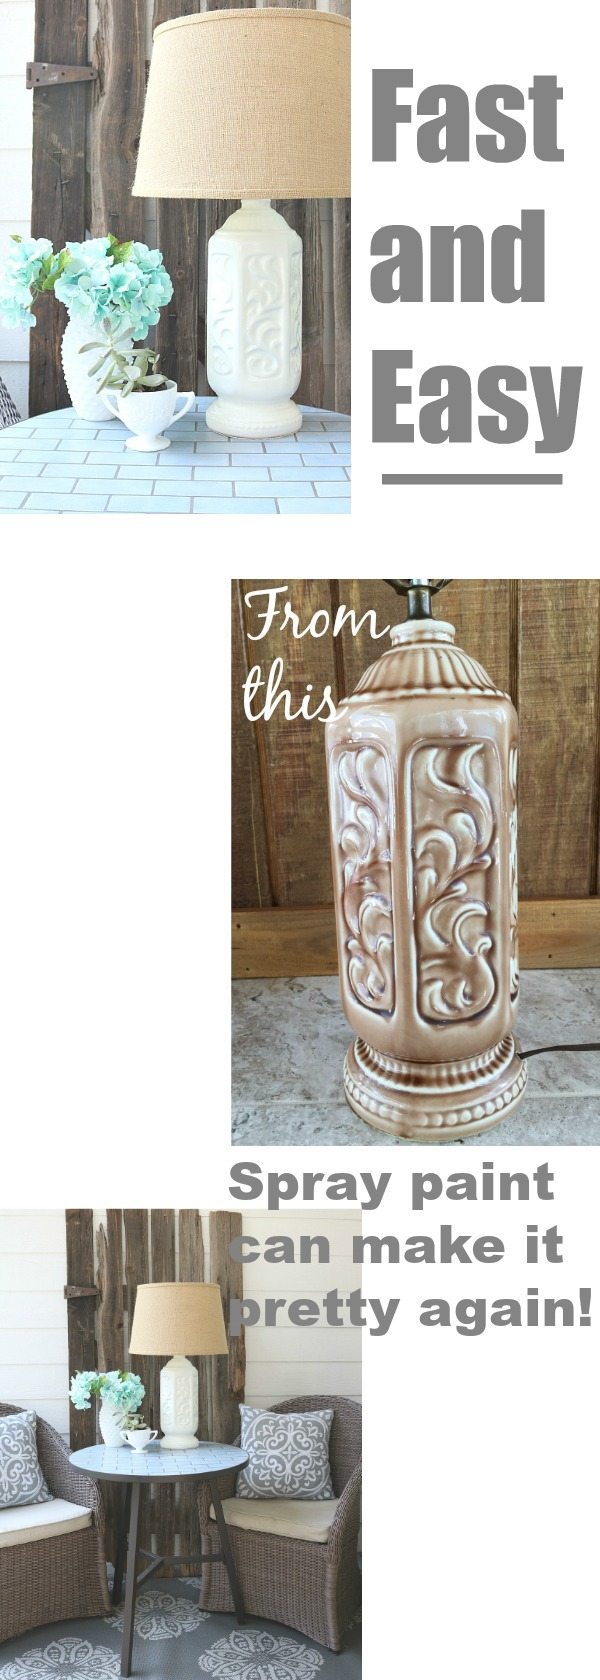 Fast and easy spray paint idea for a new milk glass look